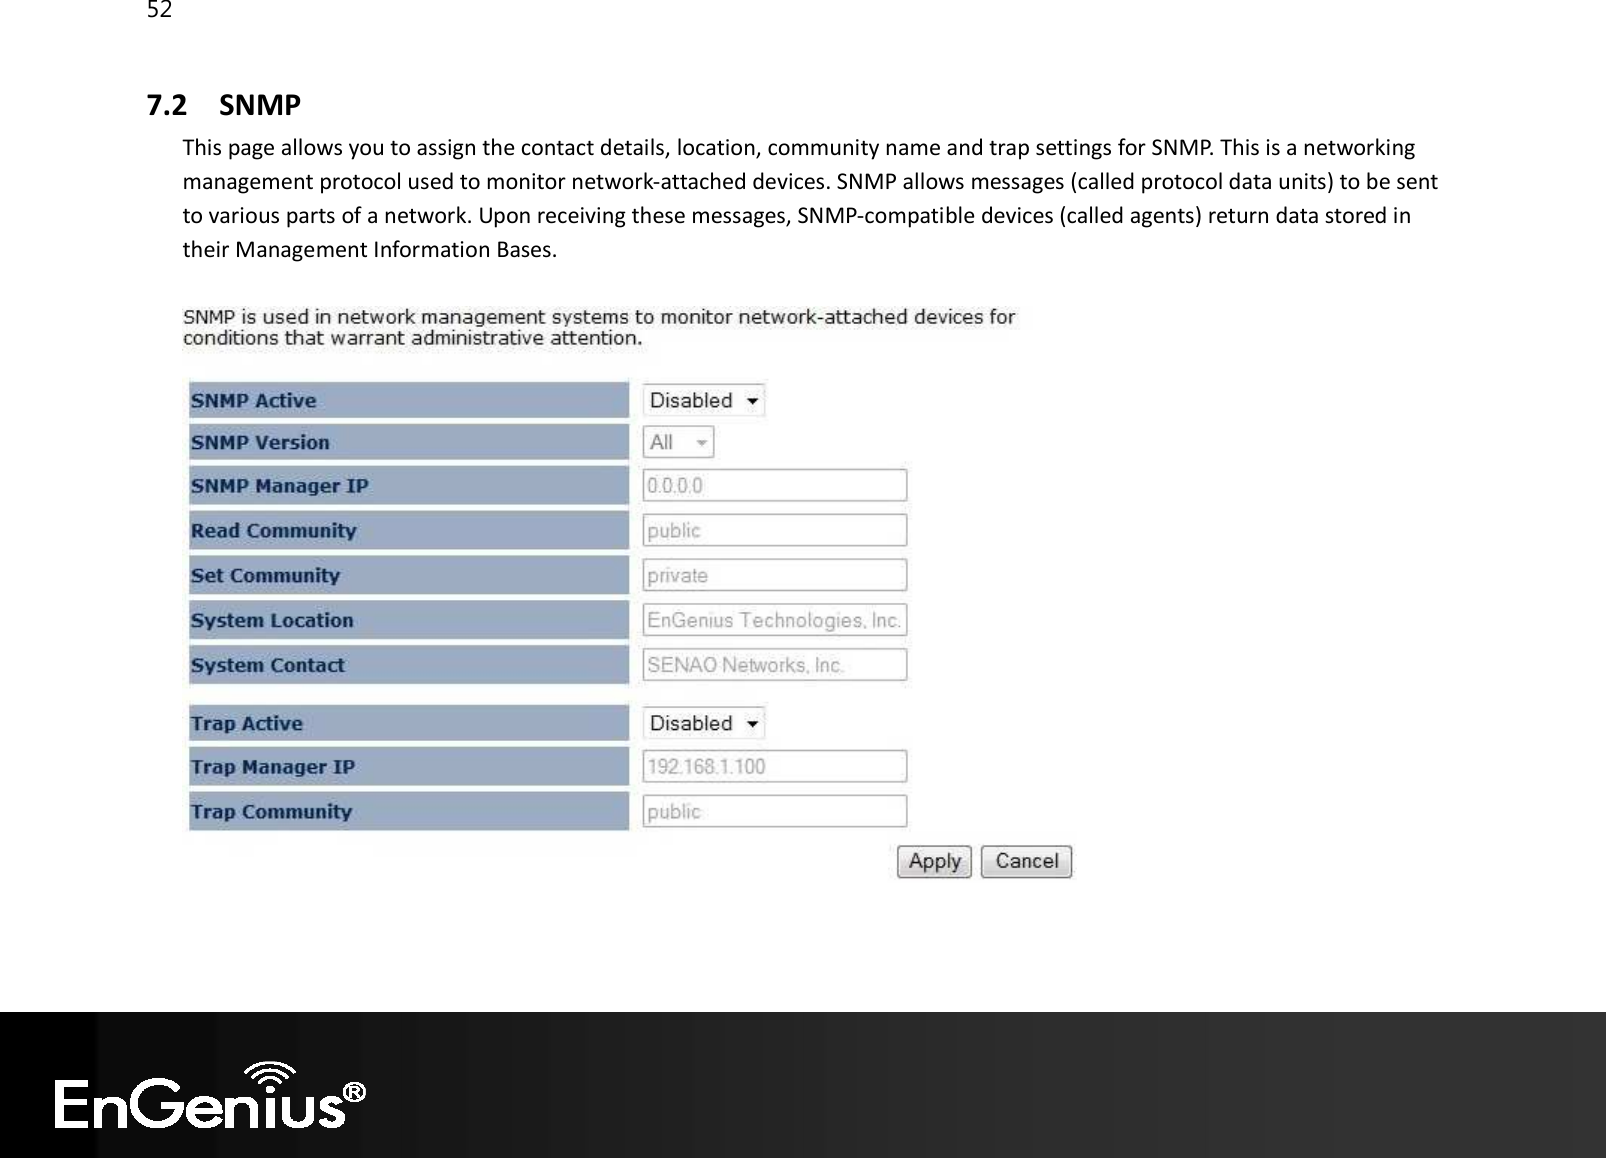 52  7.2 SNMP This page allows you to assign the contact details, location, community name and trap settings for SNMP. This is a networking management protocol used to monitor network-attached devices. SNMP allows messages (called protocol data units) to be sent to various parts of a network. Upon receiving these messages, SNMP-compatible devices (called agents) return data stored in their Management Information Bases.       